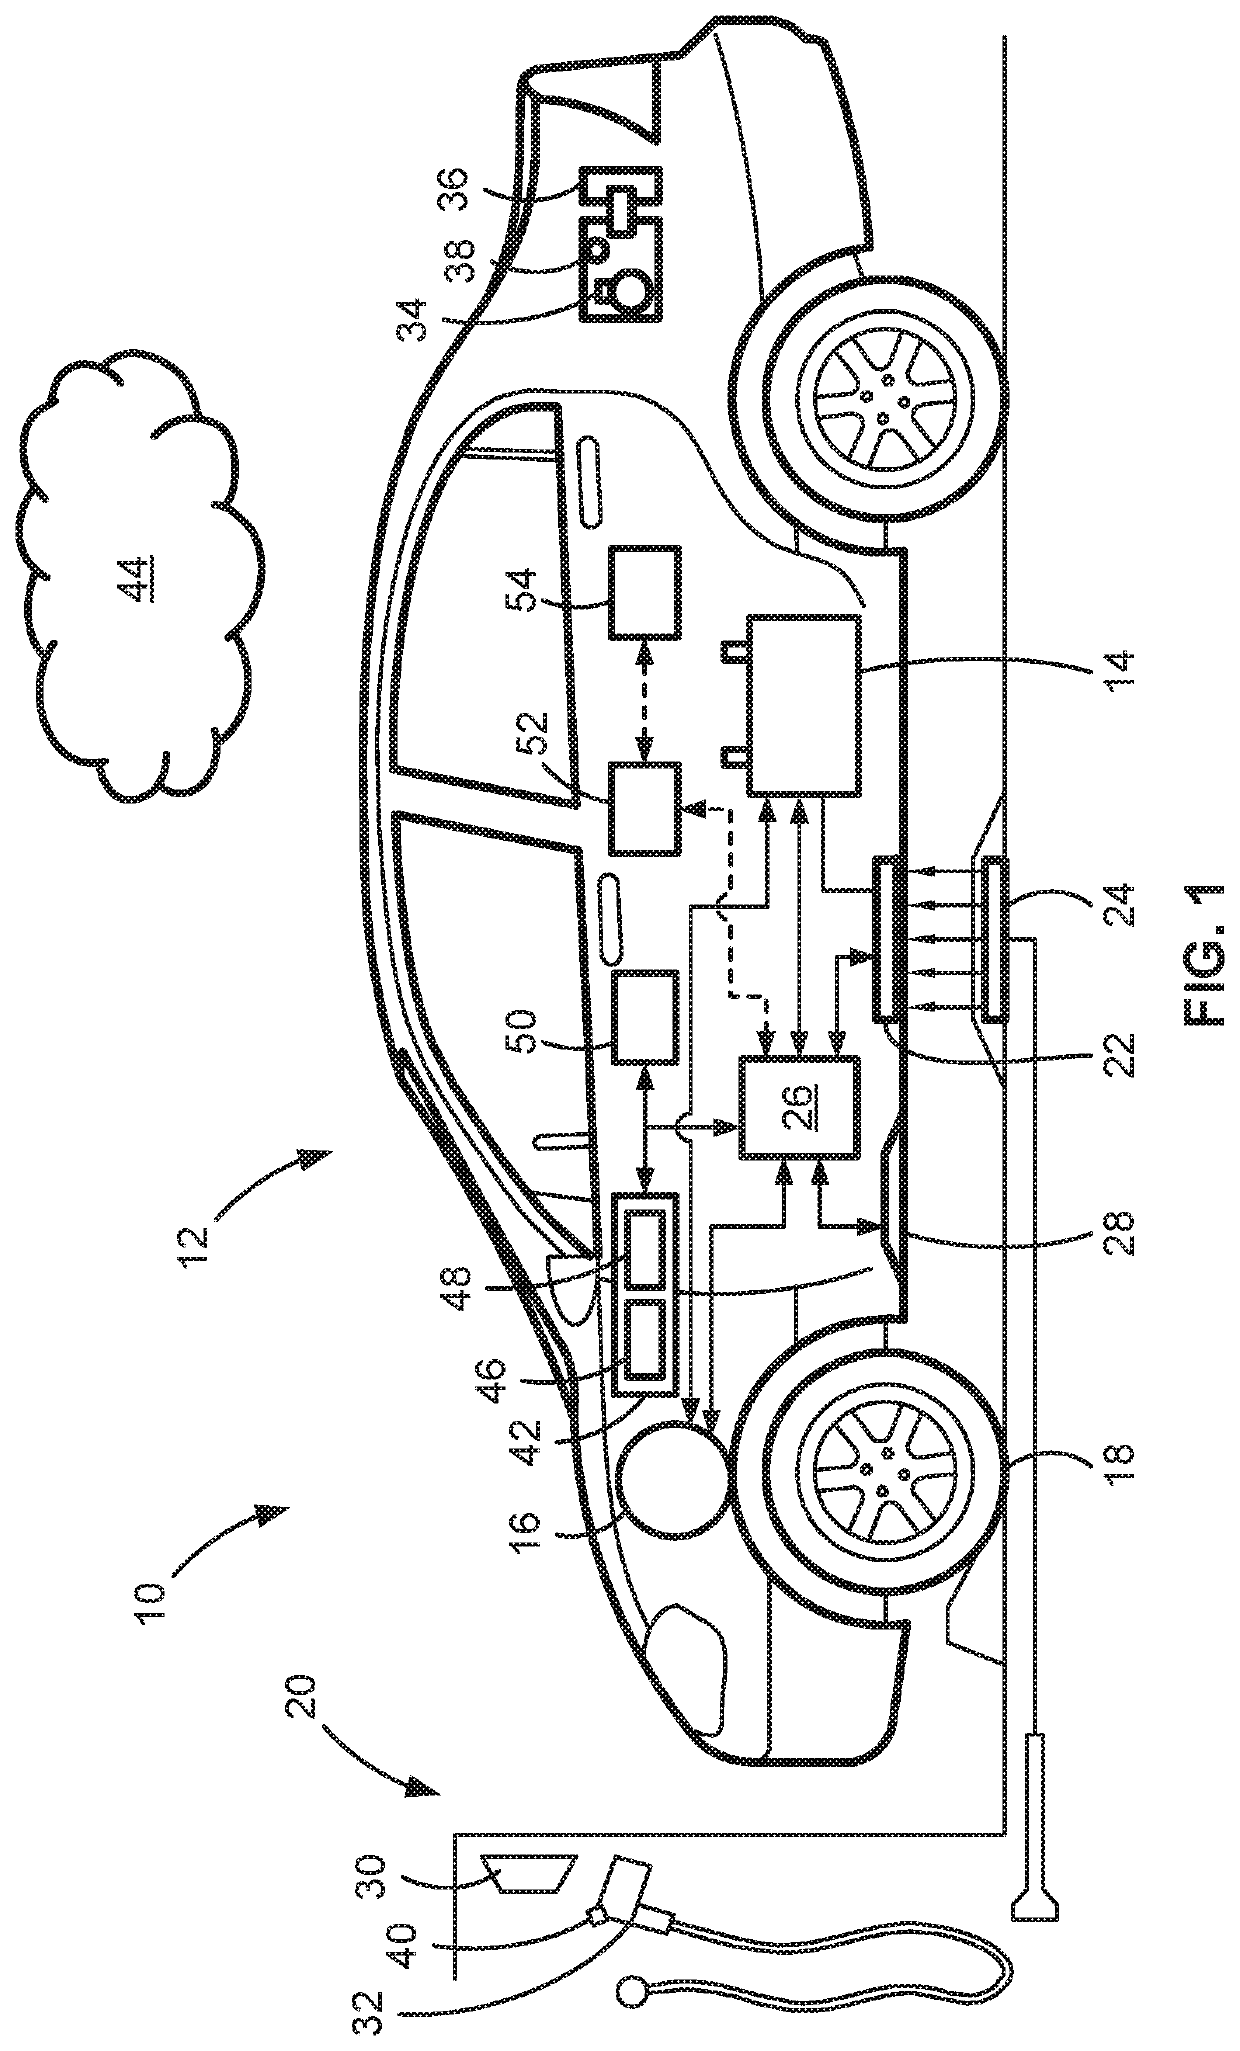 Electric-drive motor vehicles, systems, and control logic for predictive charge planning and powertrain control